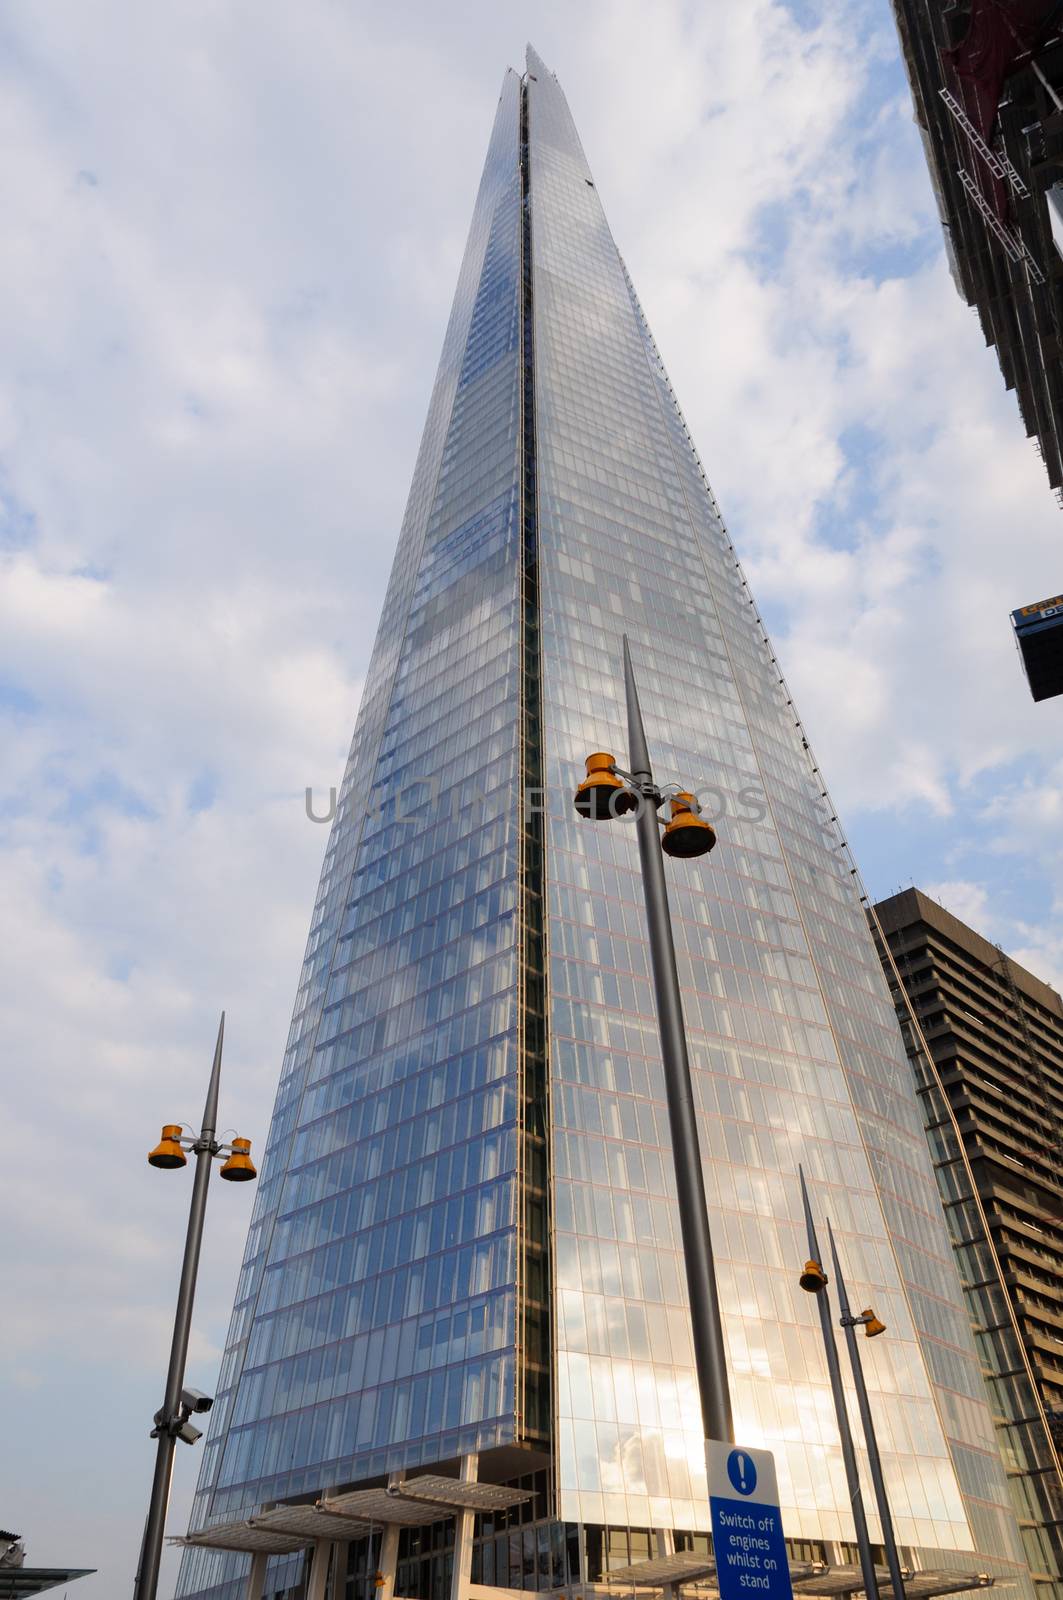 London, UK - CIRCA JULY 2012: The Shard is the tallest building in Europe at 306 metres (1,004 ft) high.